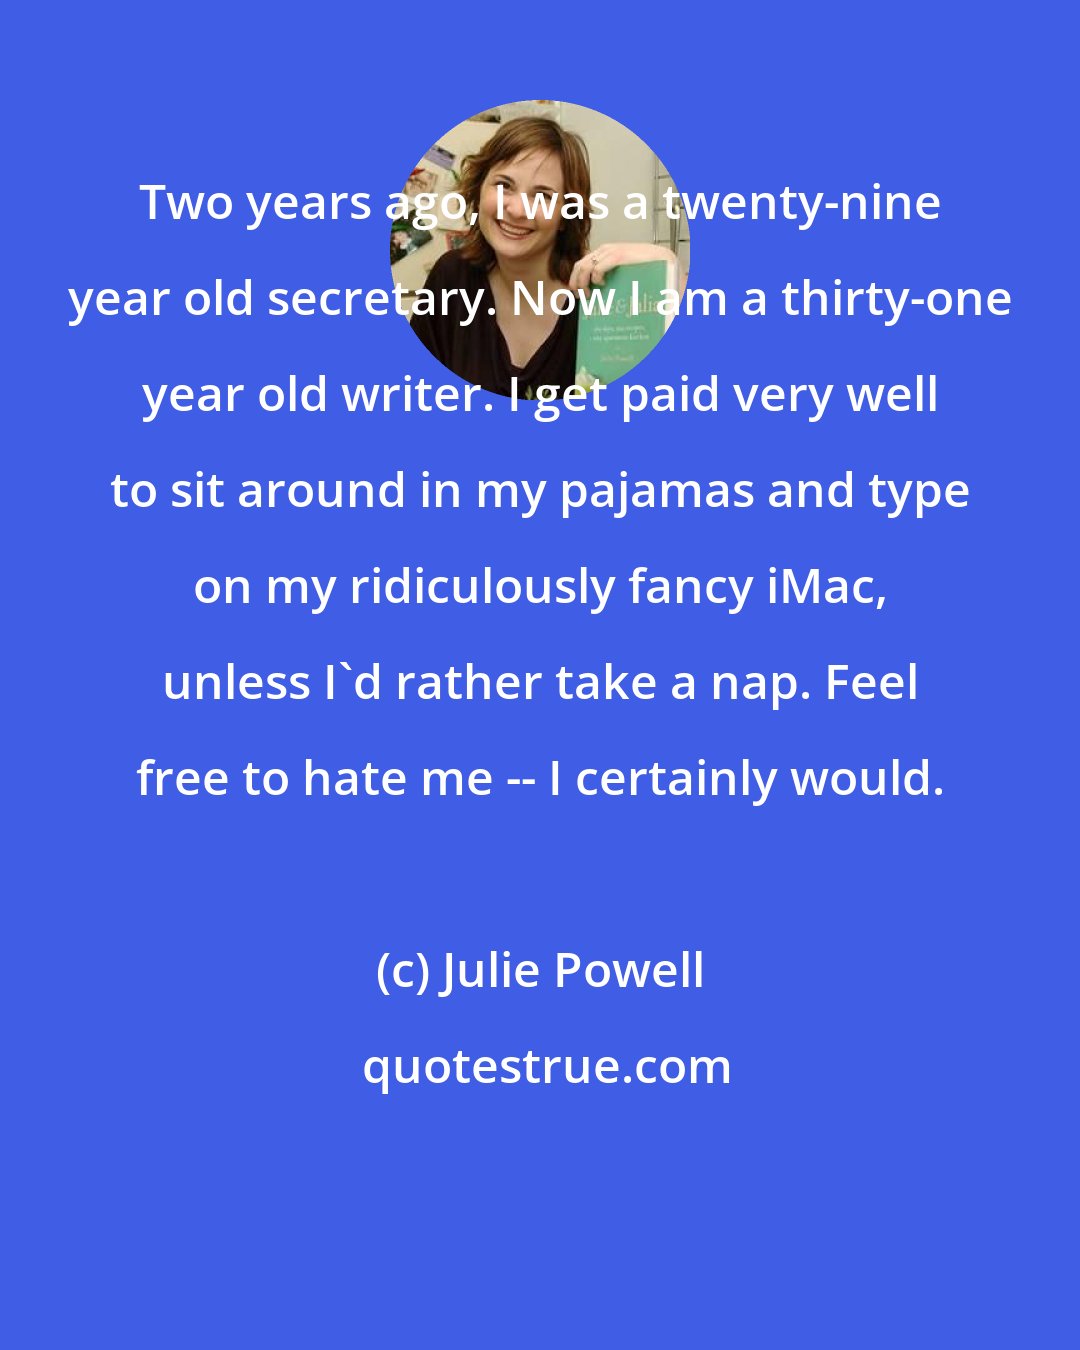 Julie Powell: Two years ago, I was a twenty-nine year old secretary. Now I am a thirty-one year old writer. I get paid very well to sit around in my pajamas and type on my ridiculously fancy iMac, unless I'd rather take a nap. Feel free to hate me -- I certainly would.